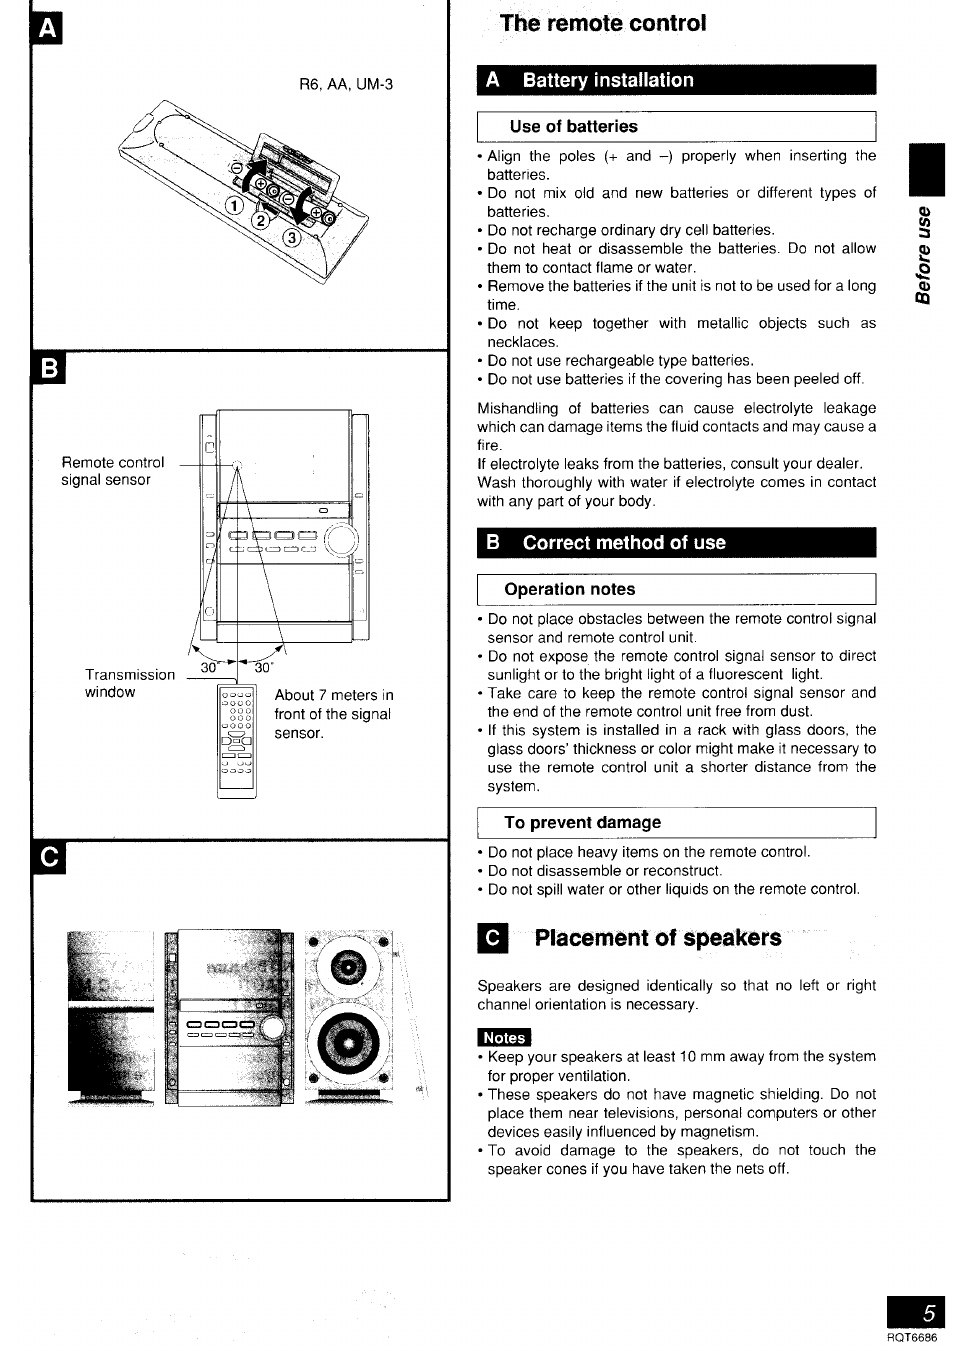 The remote control, A battery installation, Use of batteries | B correct method of use, Operation notes, To prevent damage, Q placement of speakers, Notes, Placement of speakers | Инструкция по эксплуатации Panasonic SC-PM18 | Страница 21 / 44